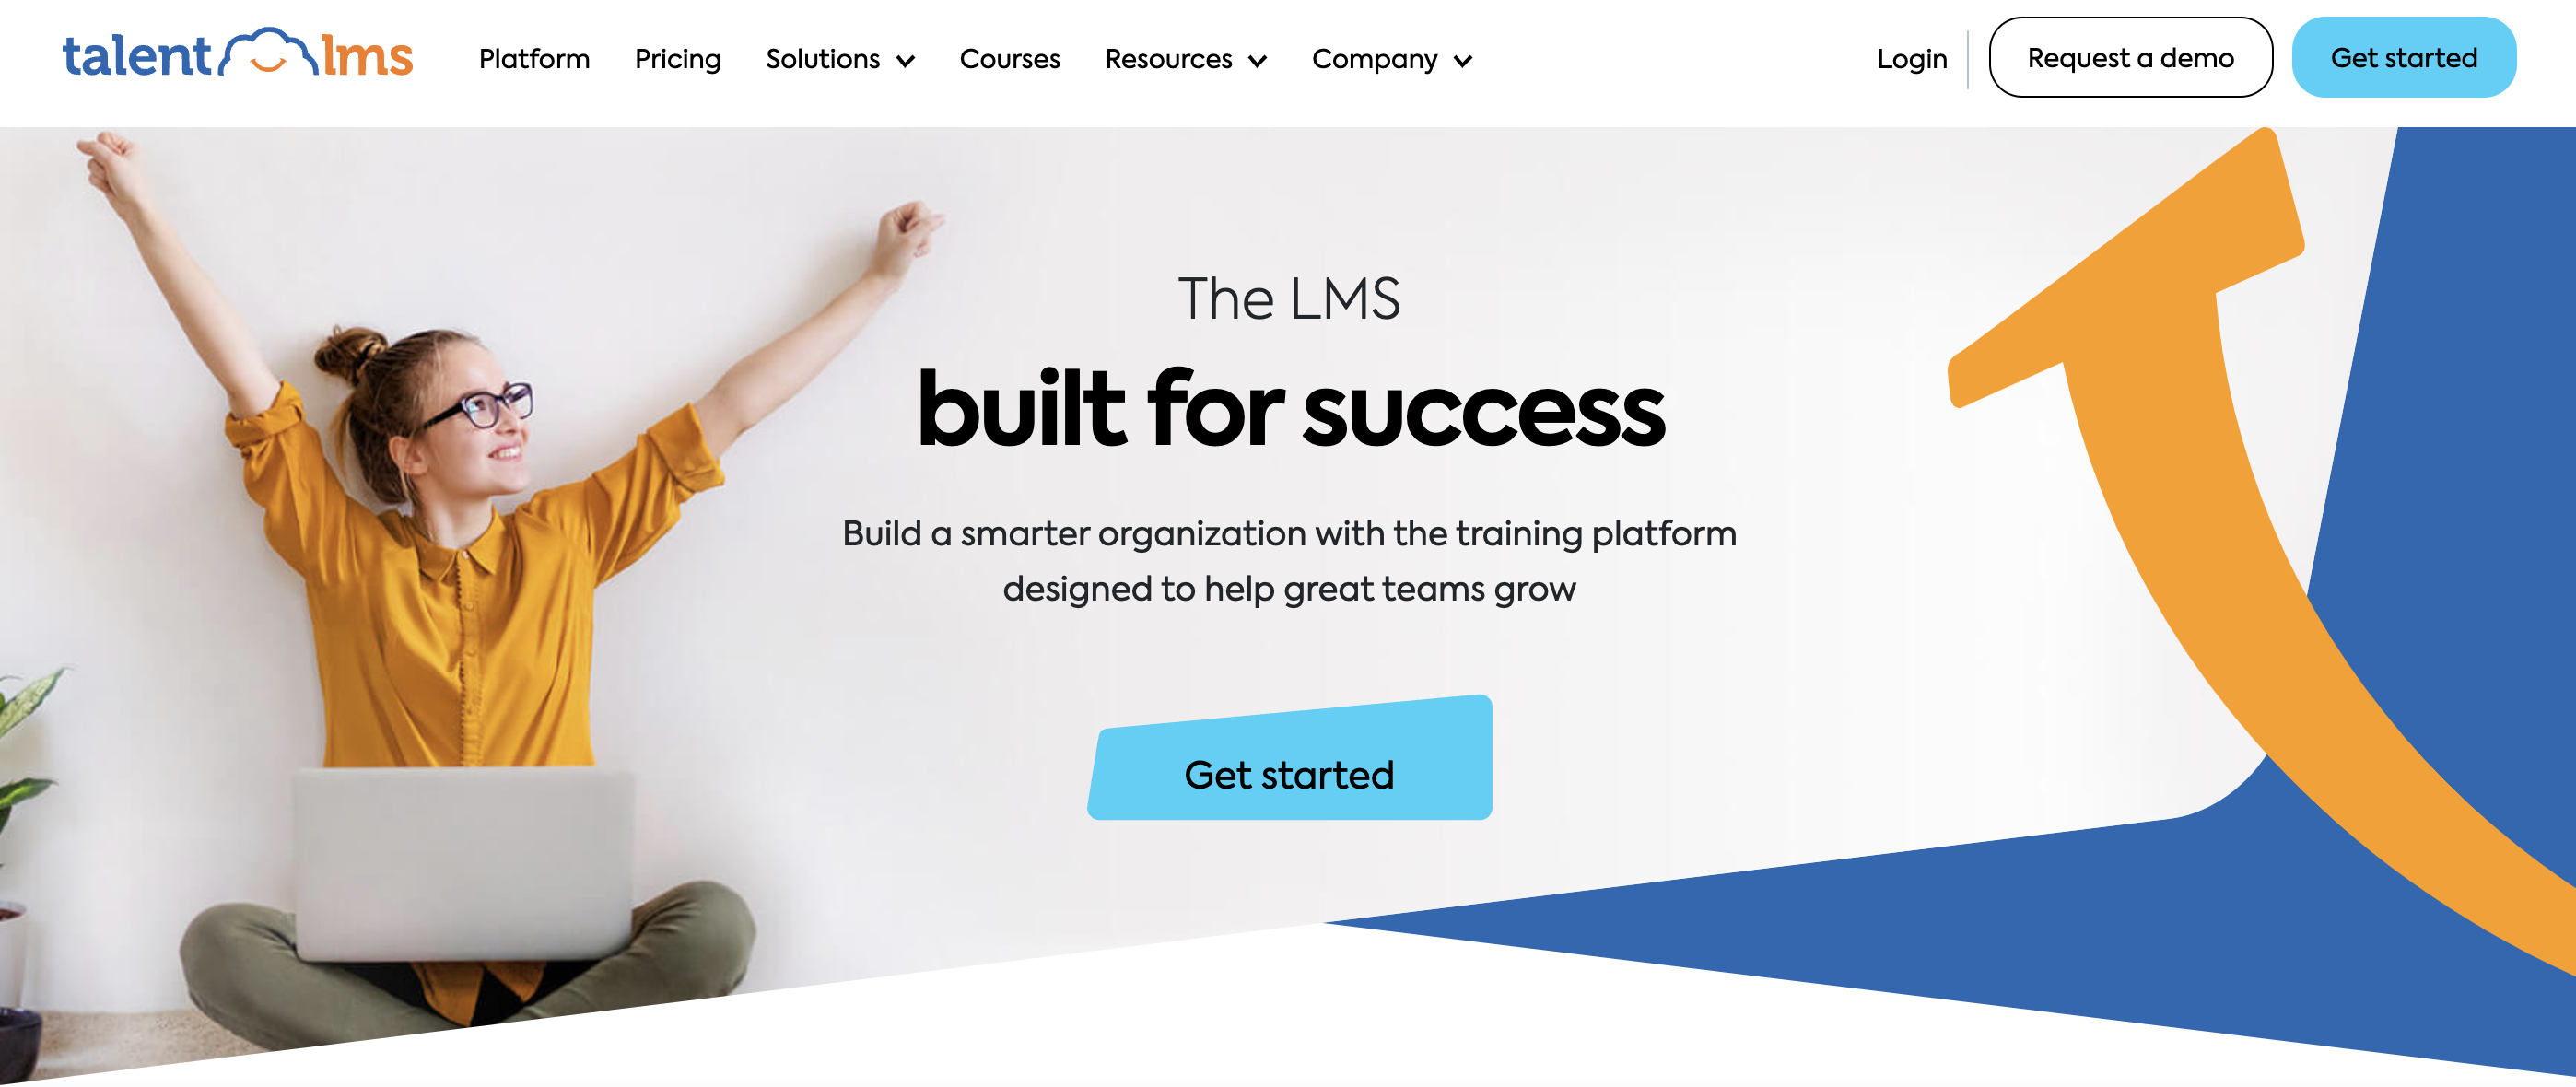 custom LMS software development is better than existing solutions